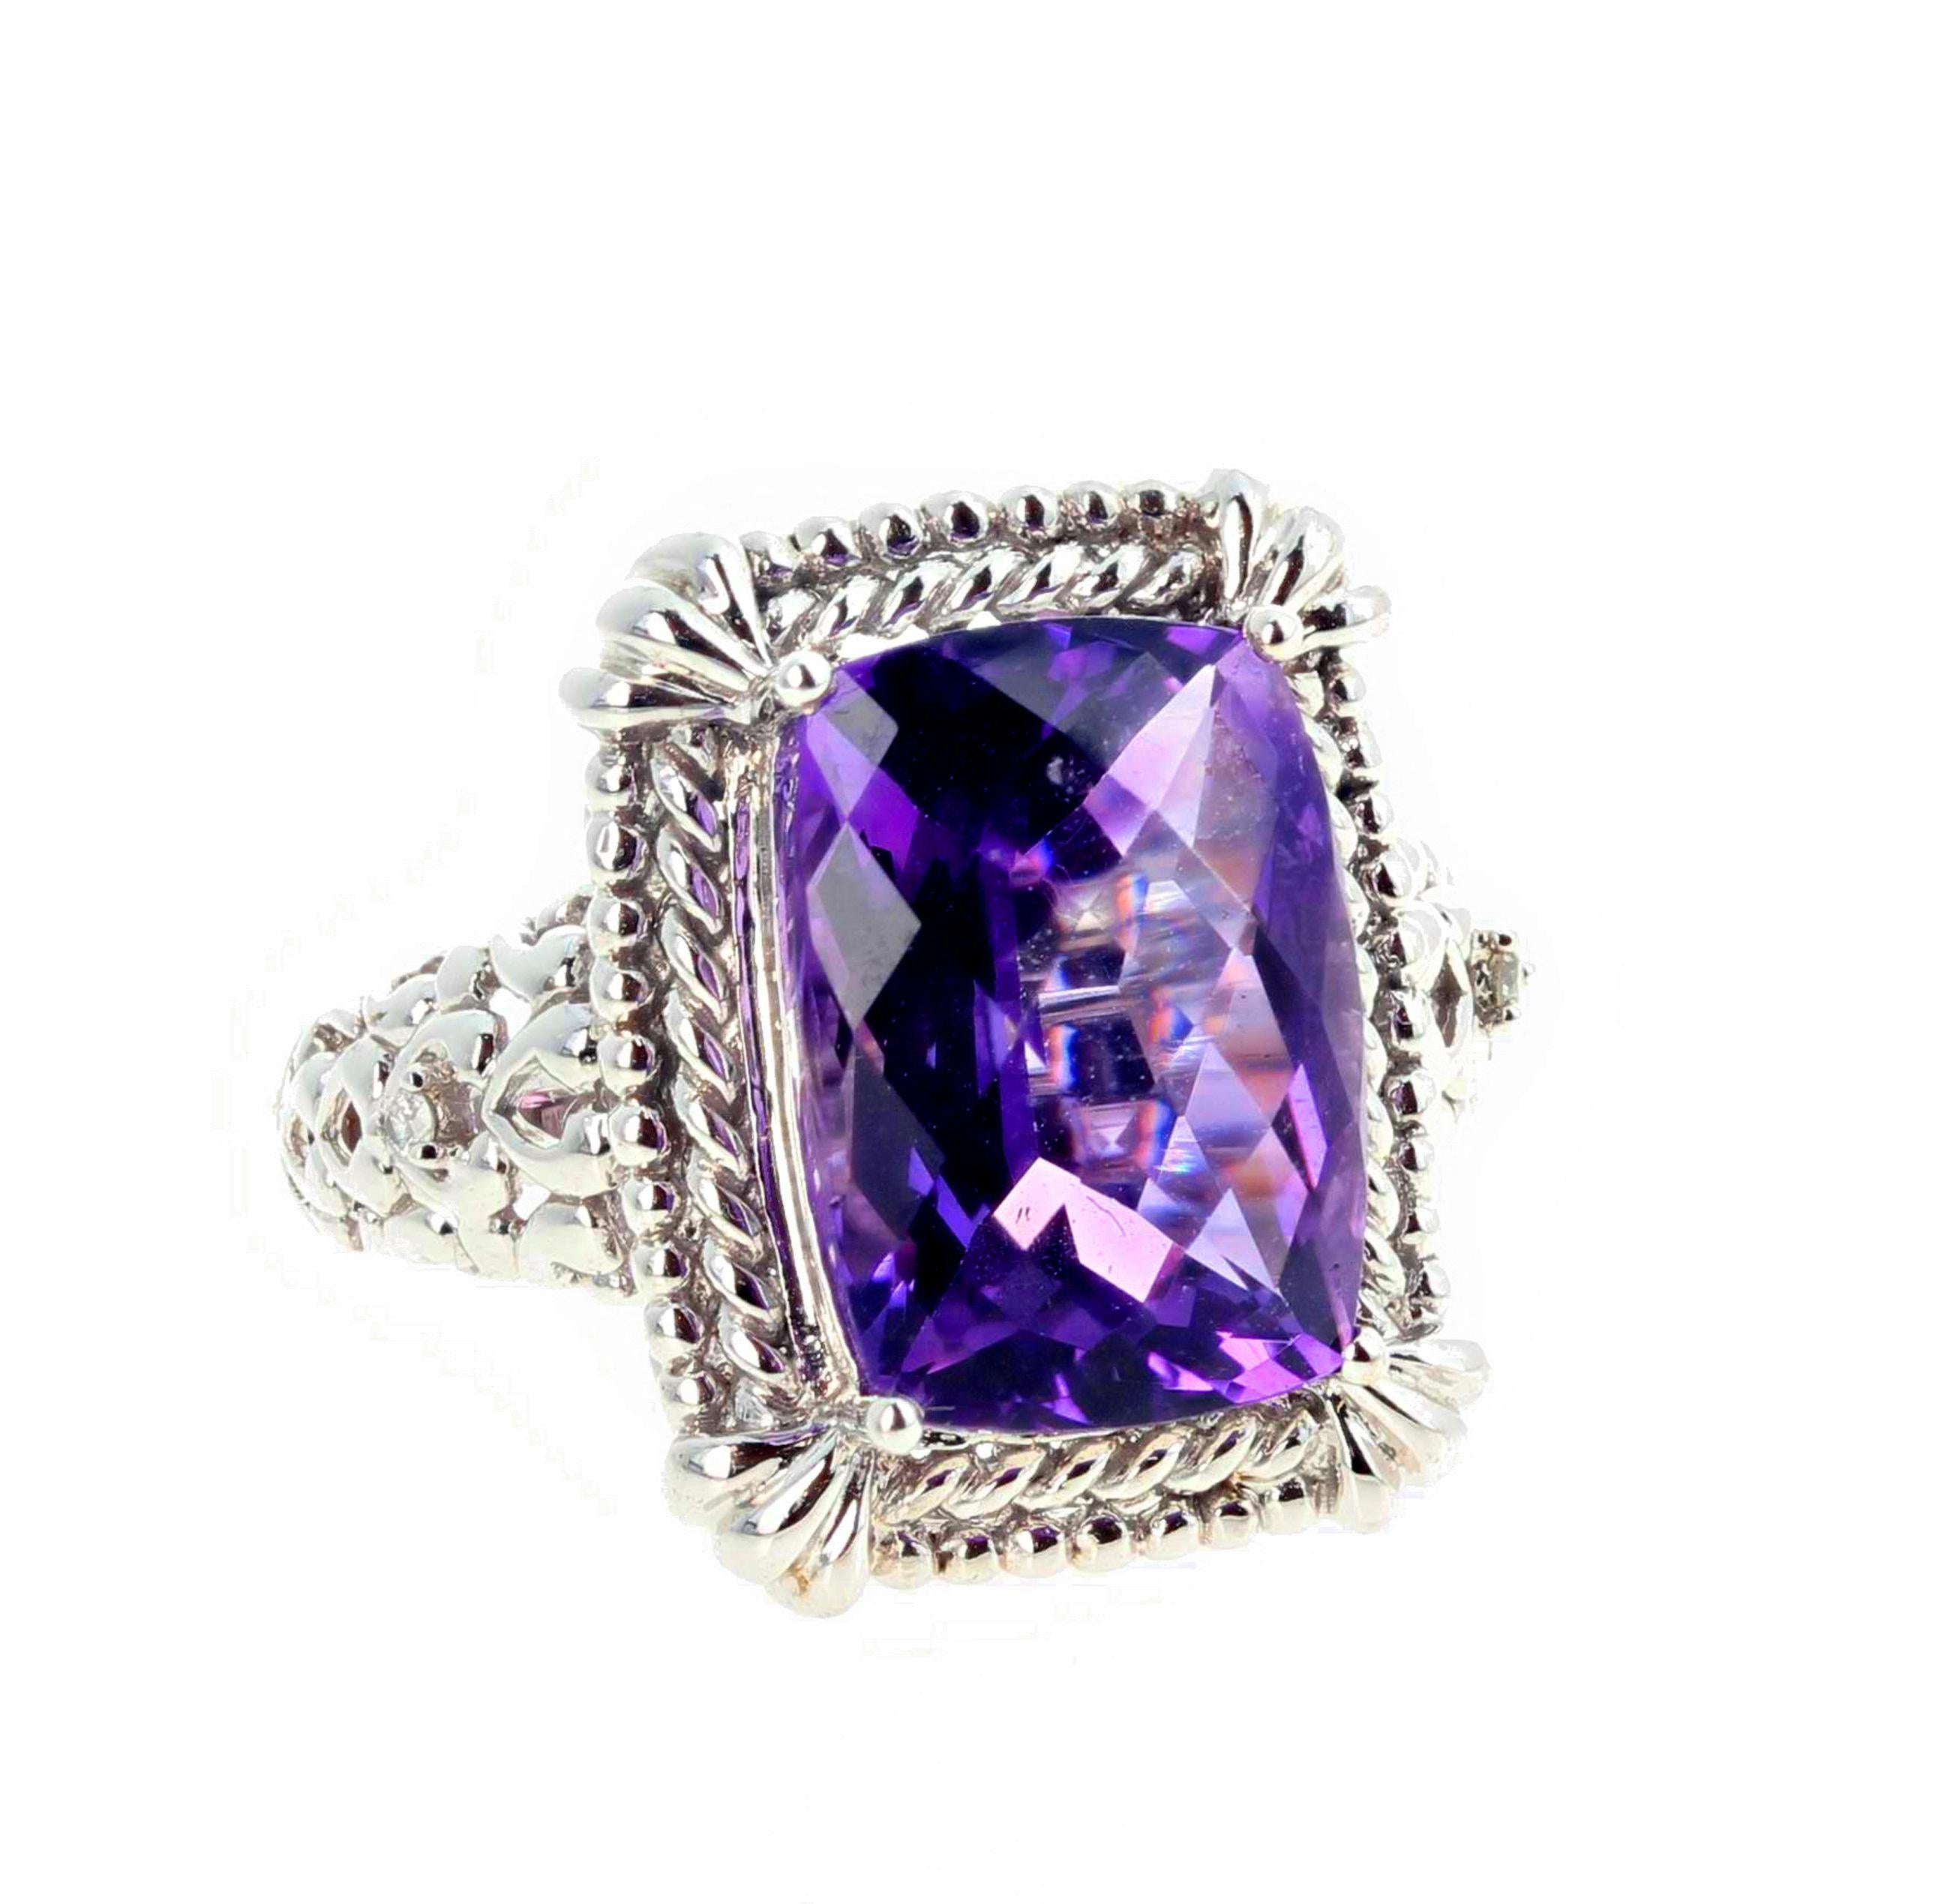 Gorgeous checkerboard gem cut 6.15 carats of clear glittering Amethyst set in this amazing 10kt white gold ring size 7.5 sizable FOR FREE.  The Amethyst is 14.6 mm x 12 mm with fascinating pinky purple tones.  